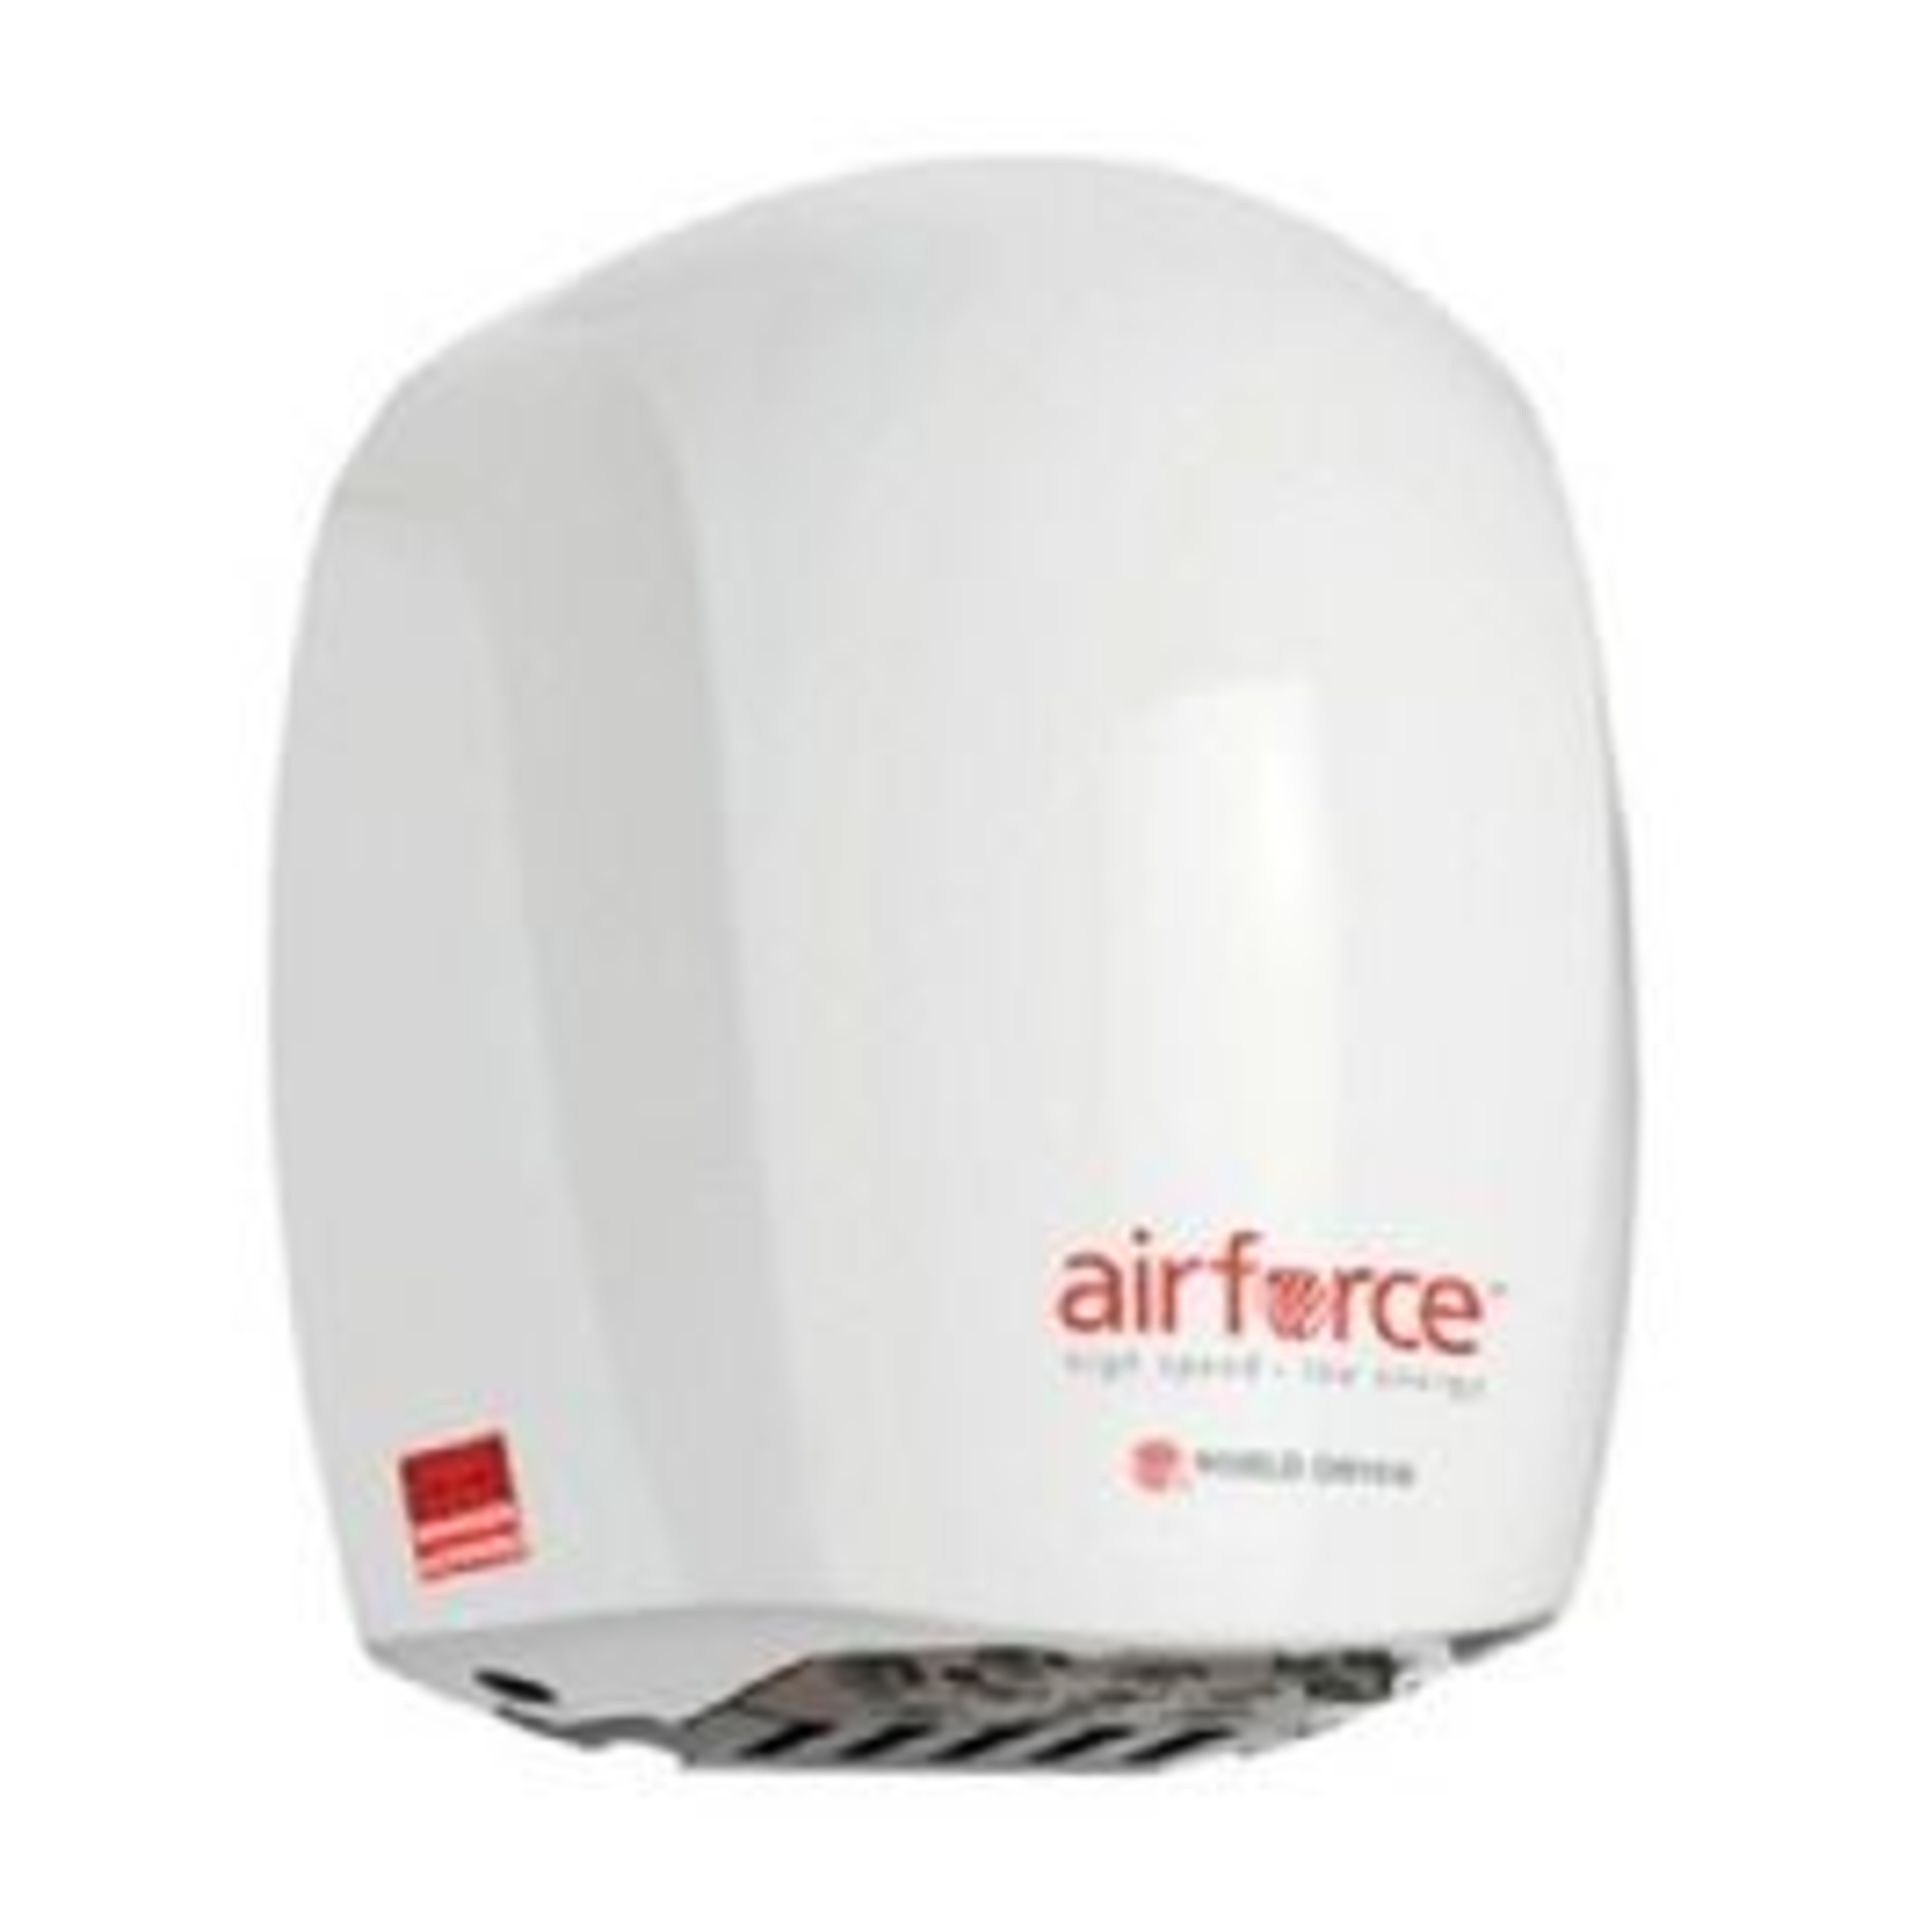 1 x Air Force High Speed Low Energy Electric Hand Dryer - Mode J48-974W3 - Brand New and Boxed - - Image 2 of 4